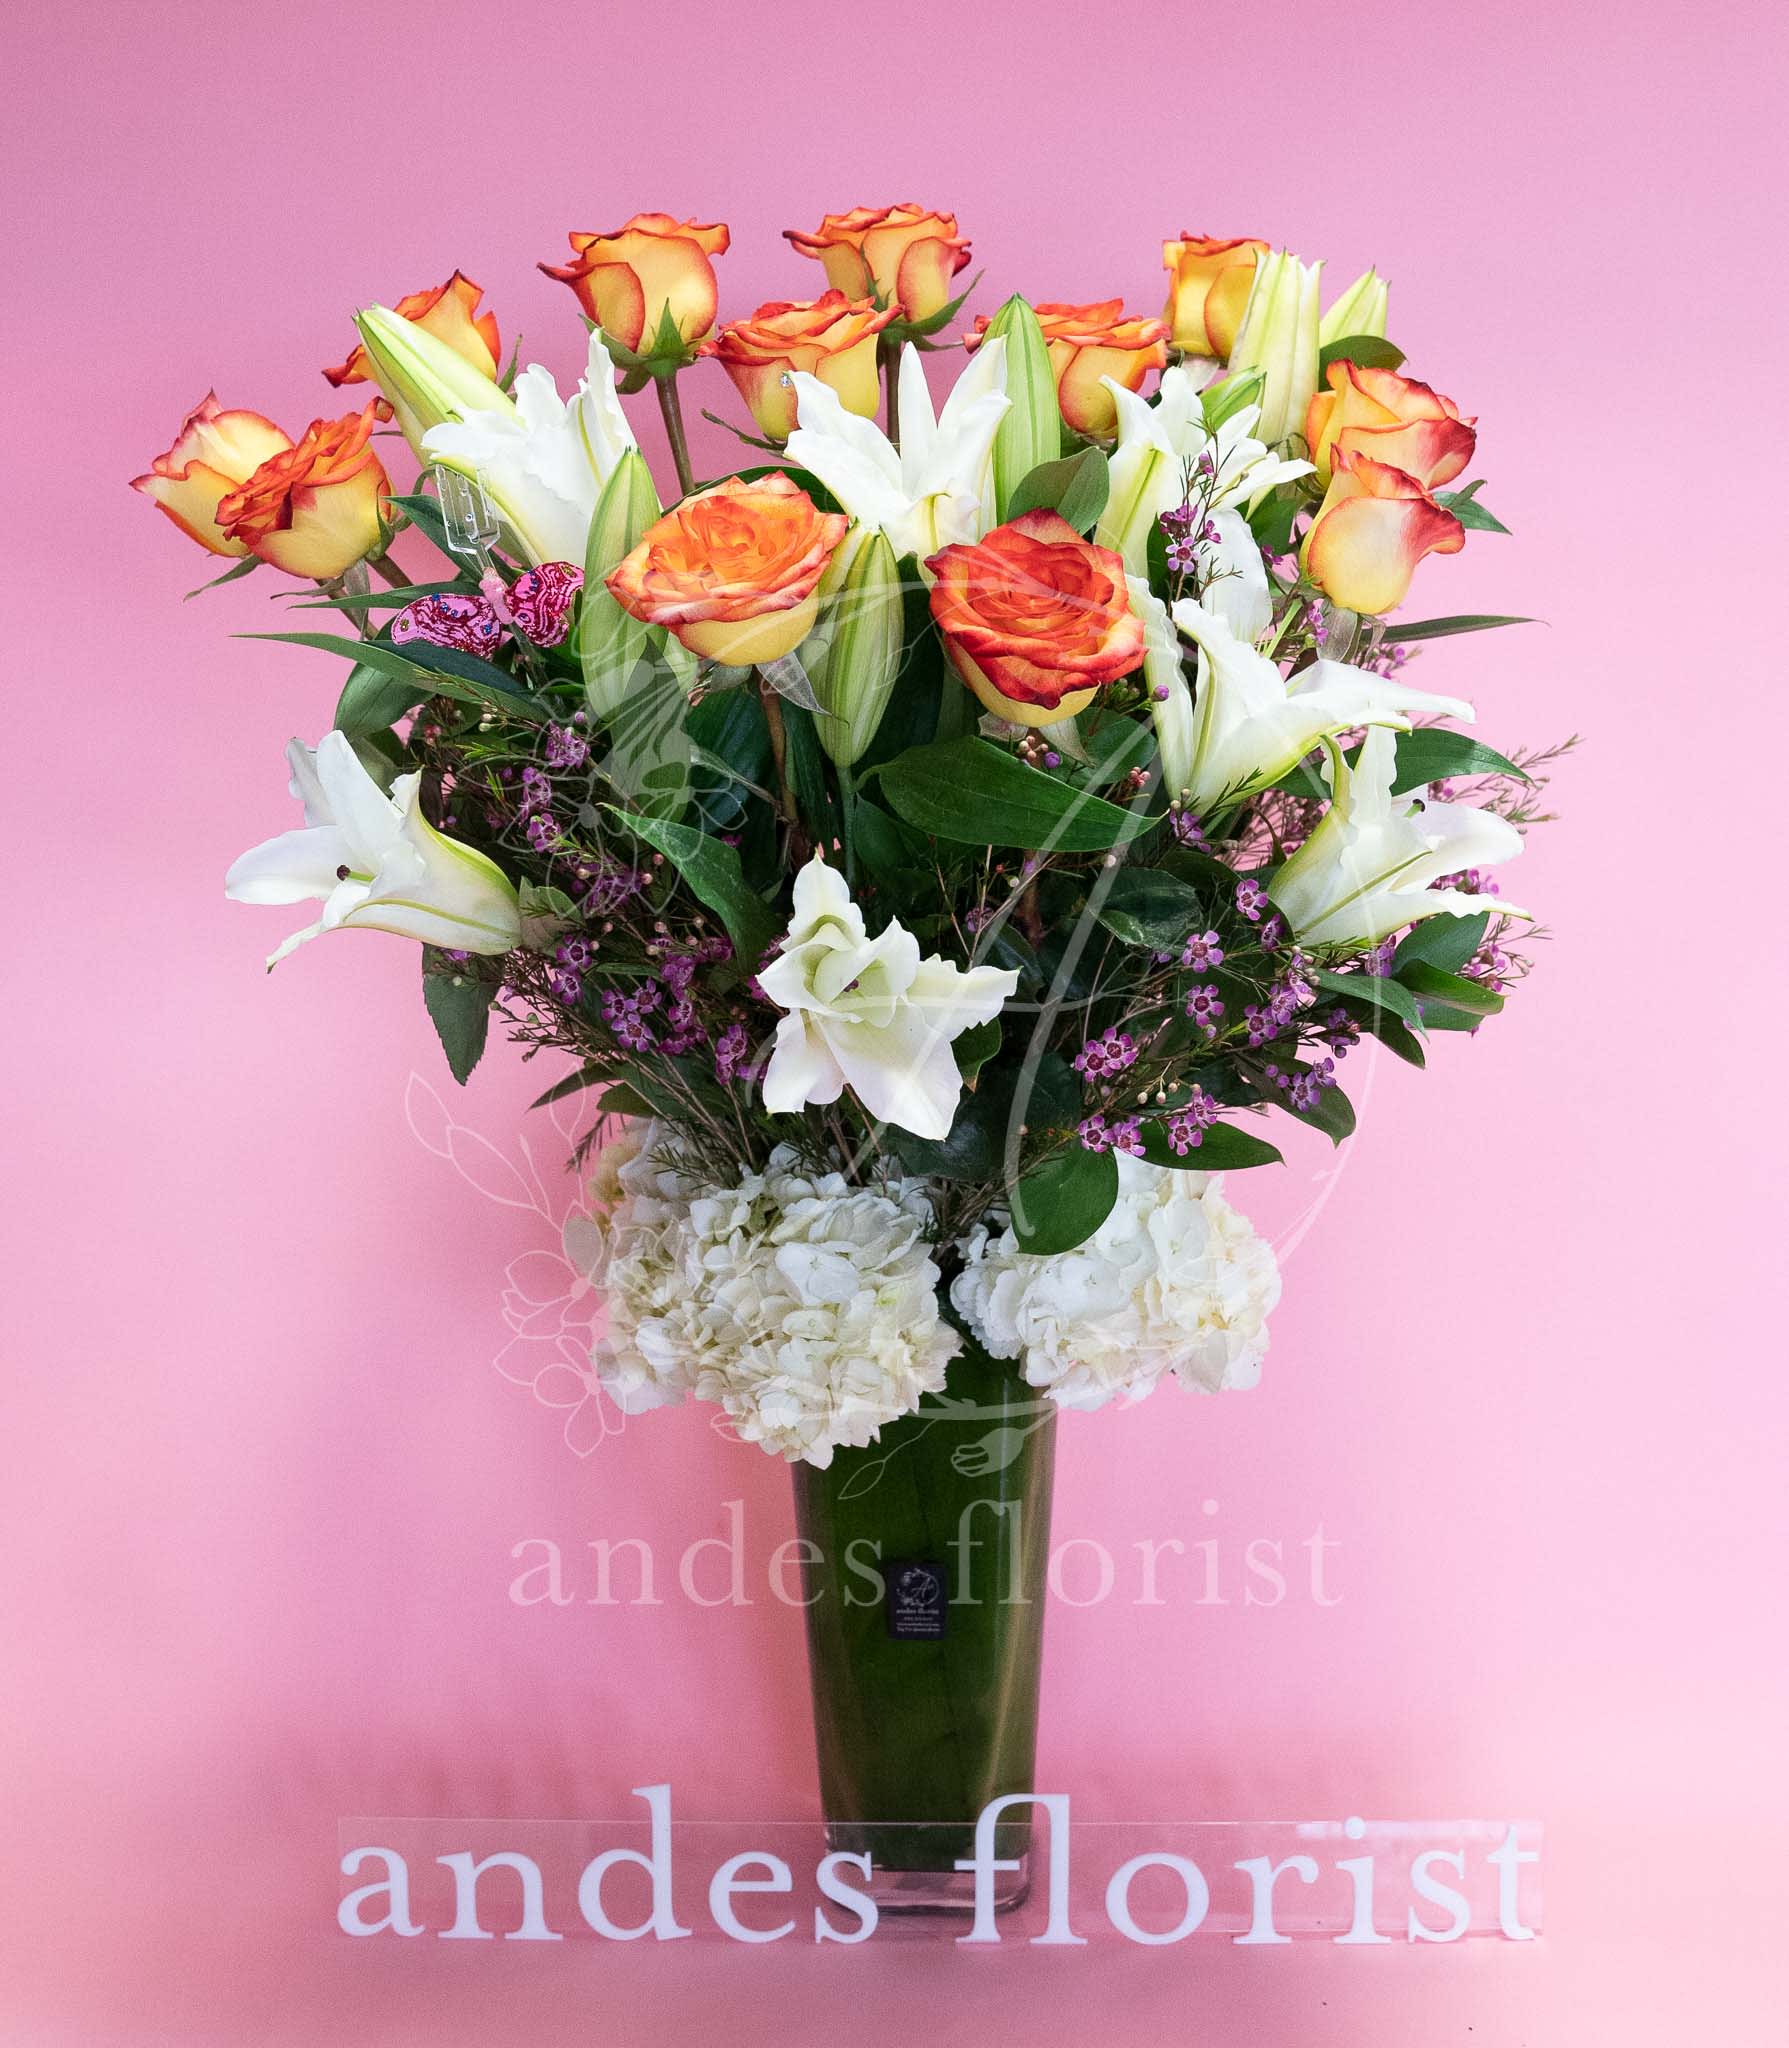 Giant Roses for Parties, Jumbo Floral Accents